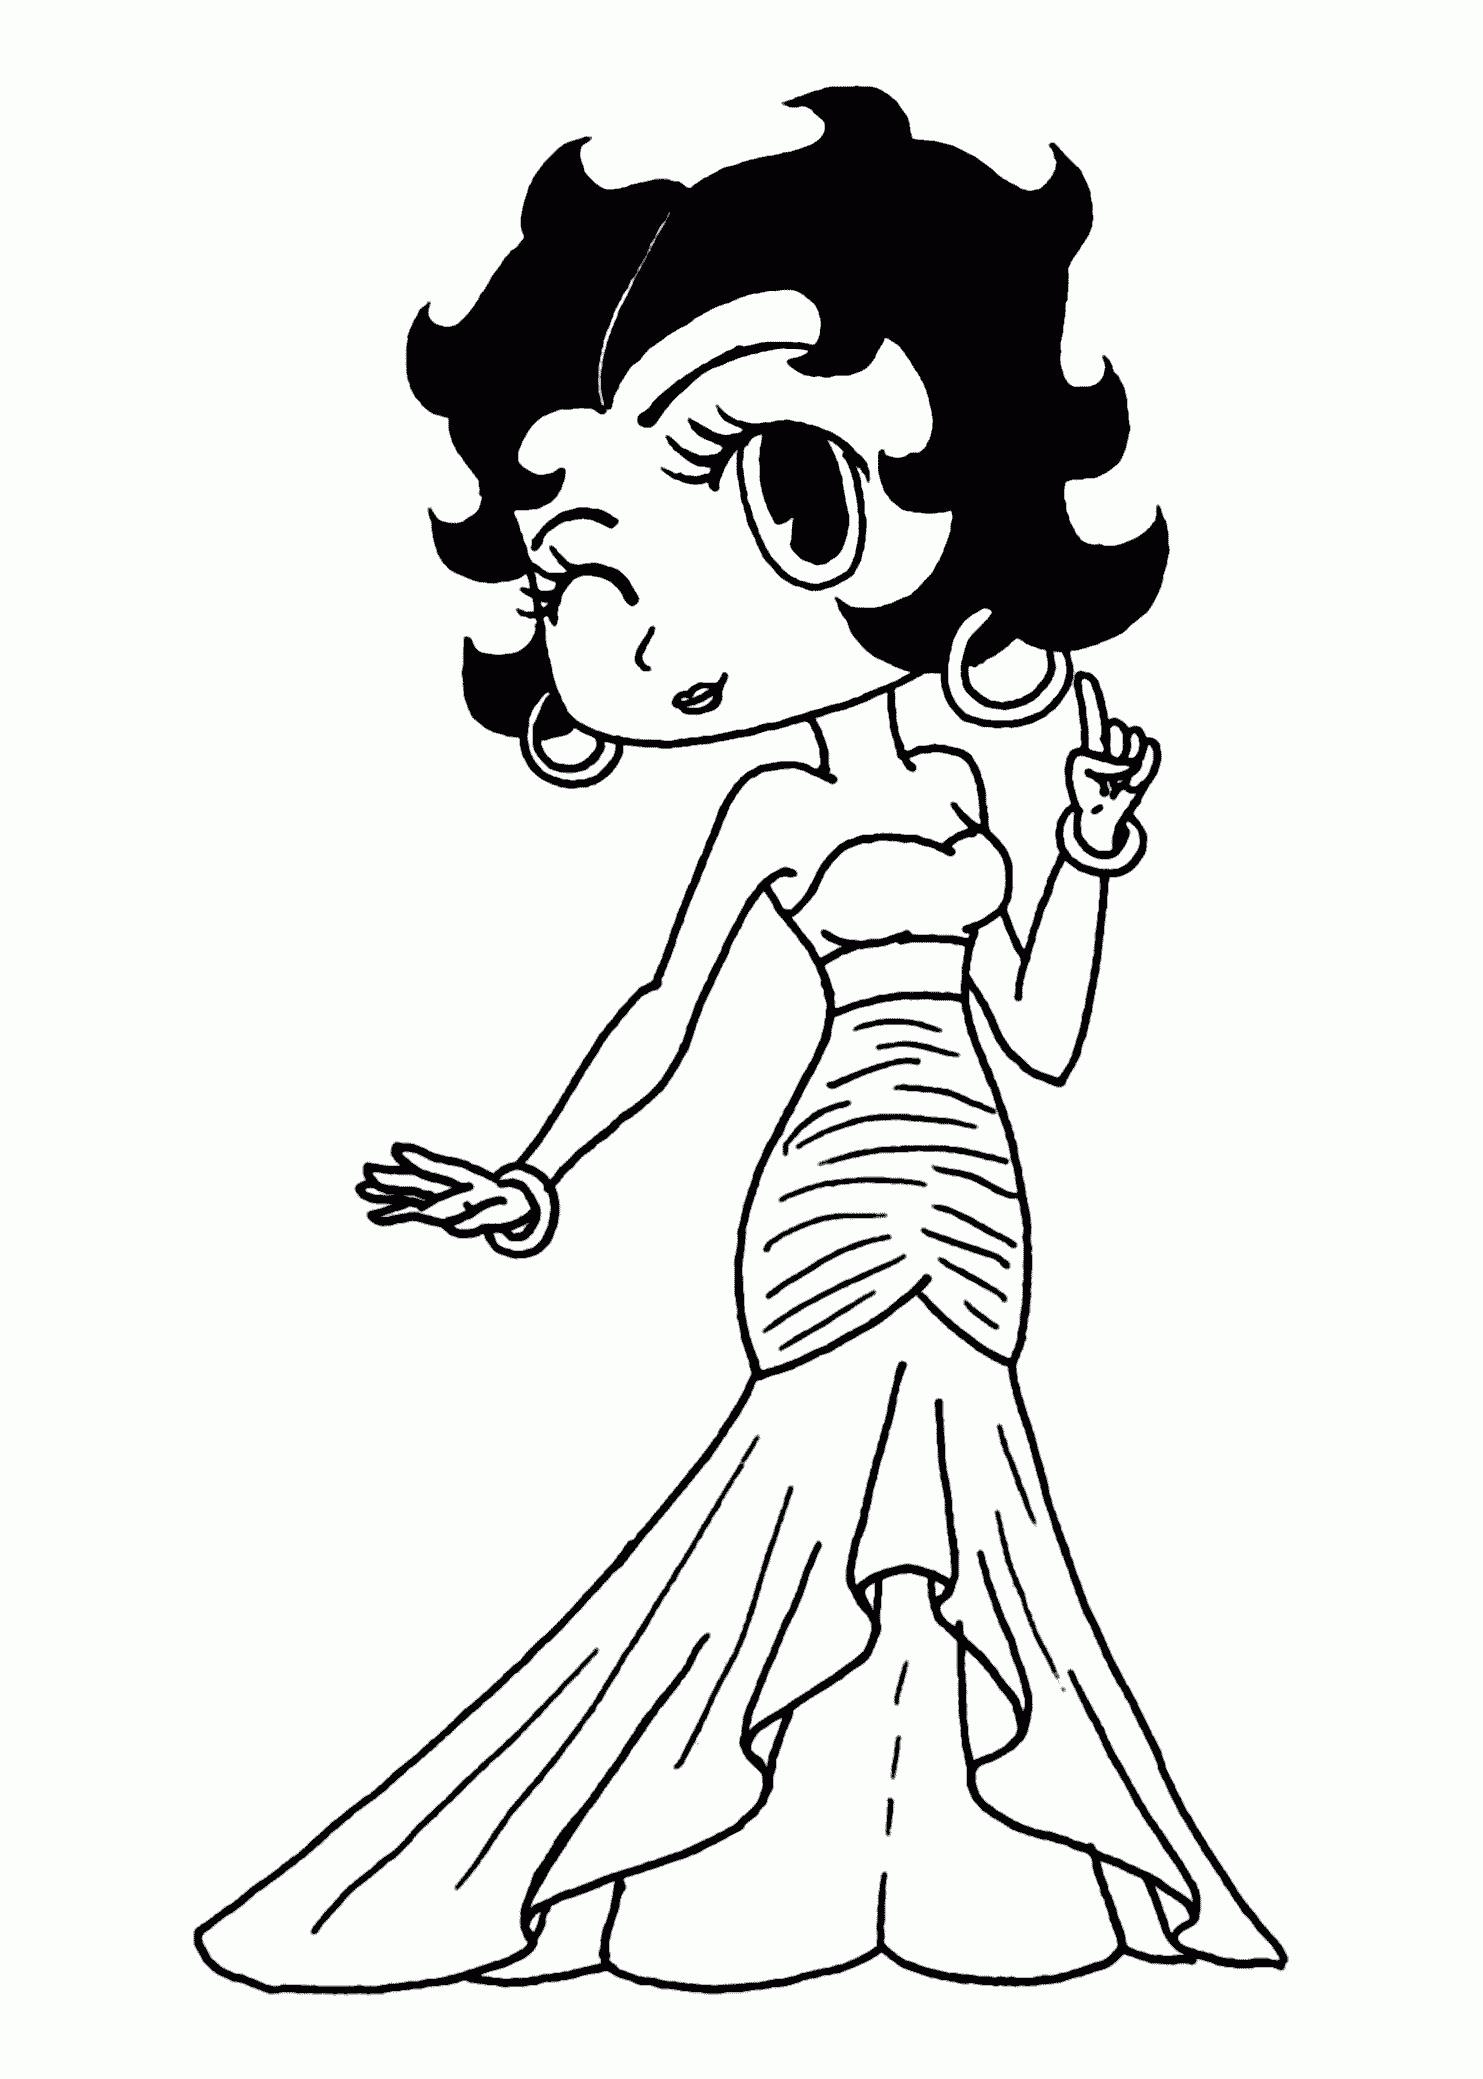 Personalized Free Printable Betty Boop Coloring Pages For Kids ...